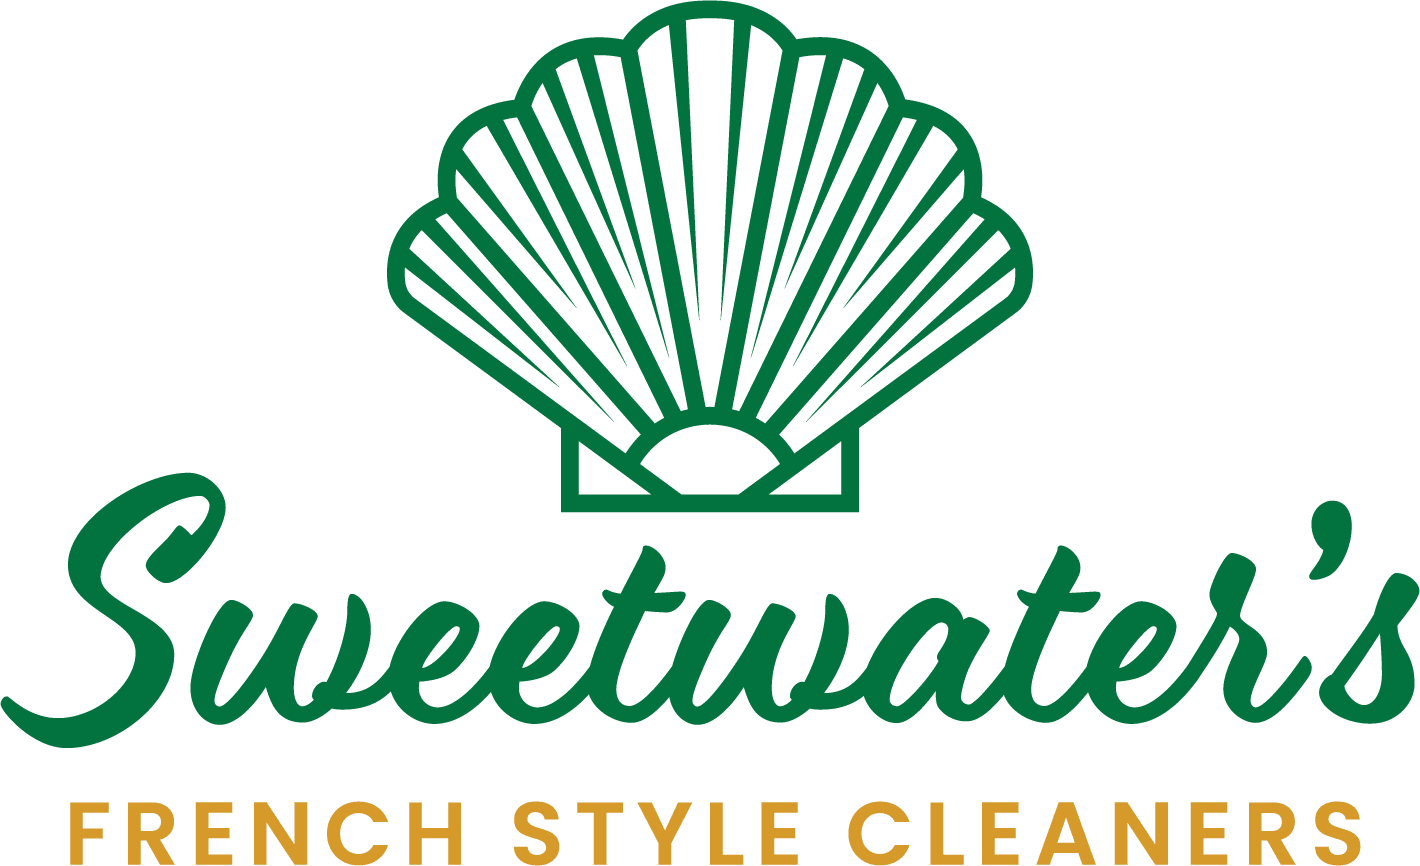 A green and yellow logo for sweetwate 's french style cleaning.